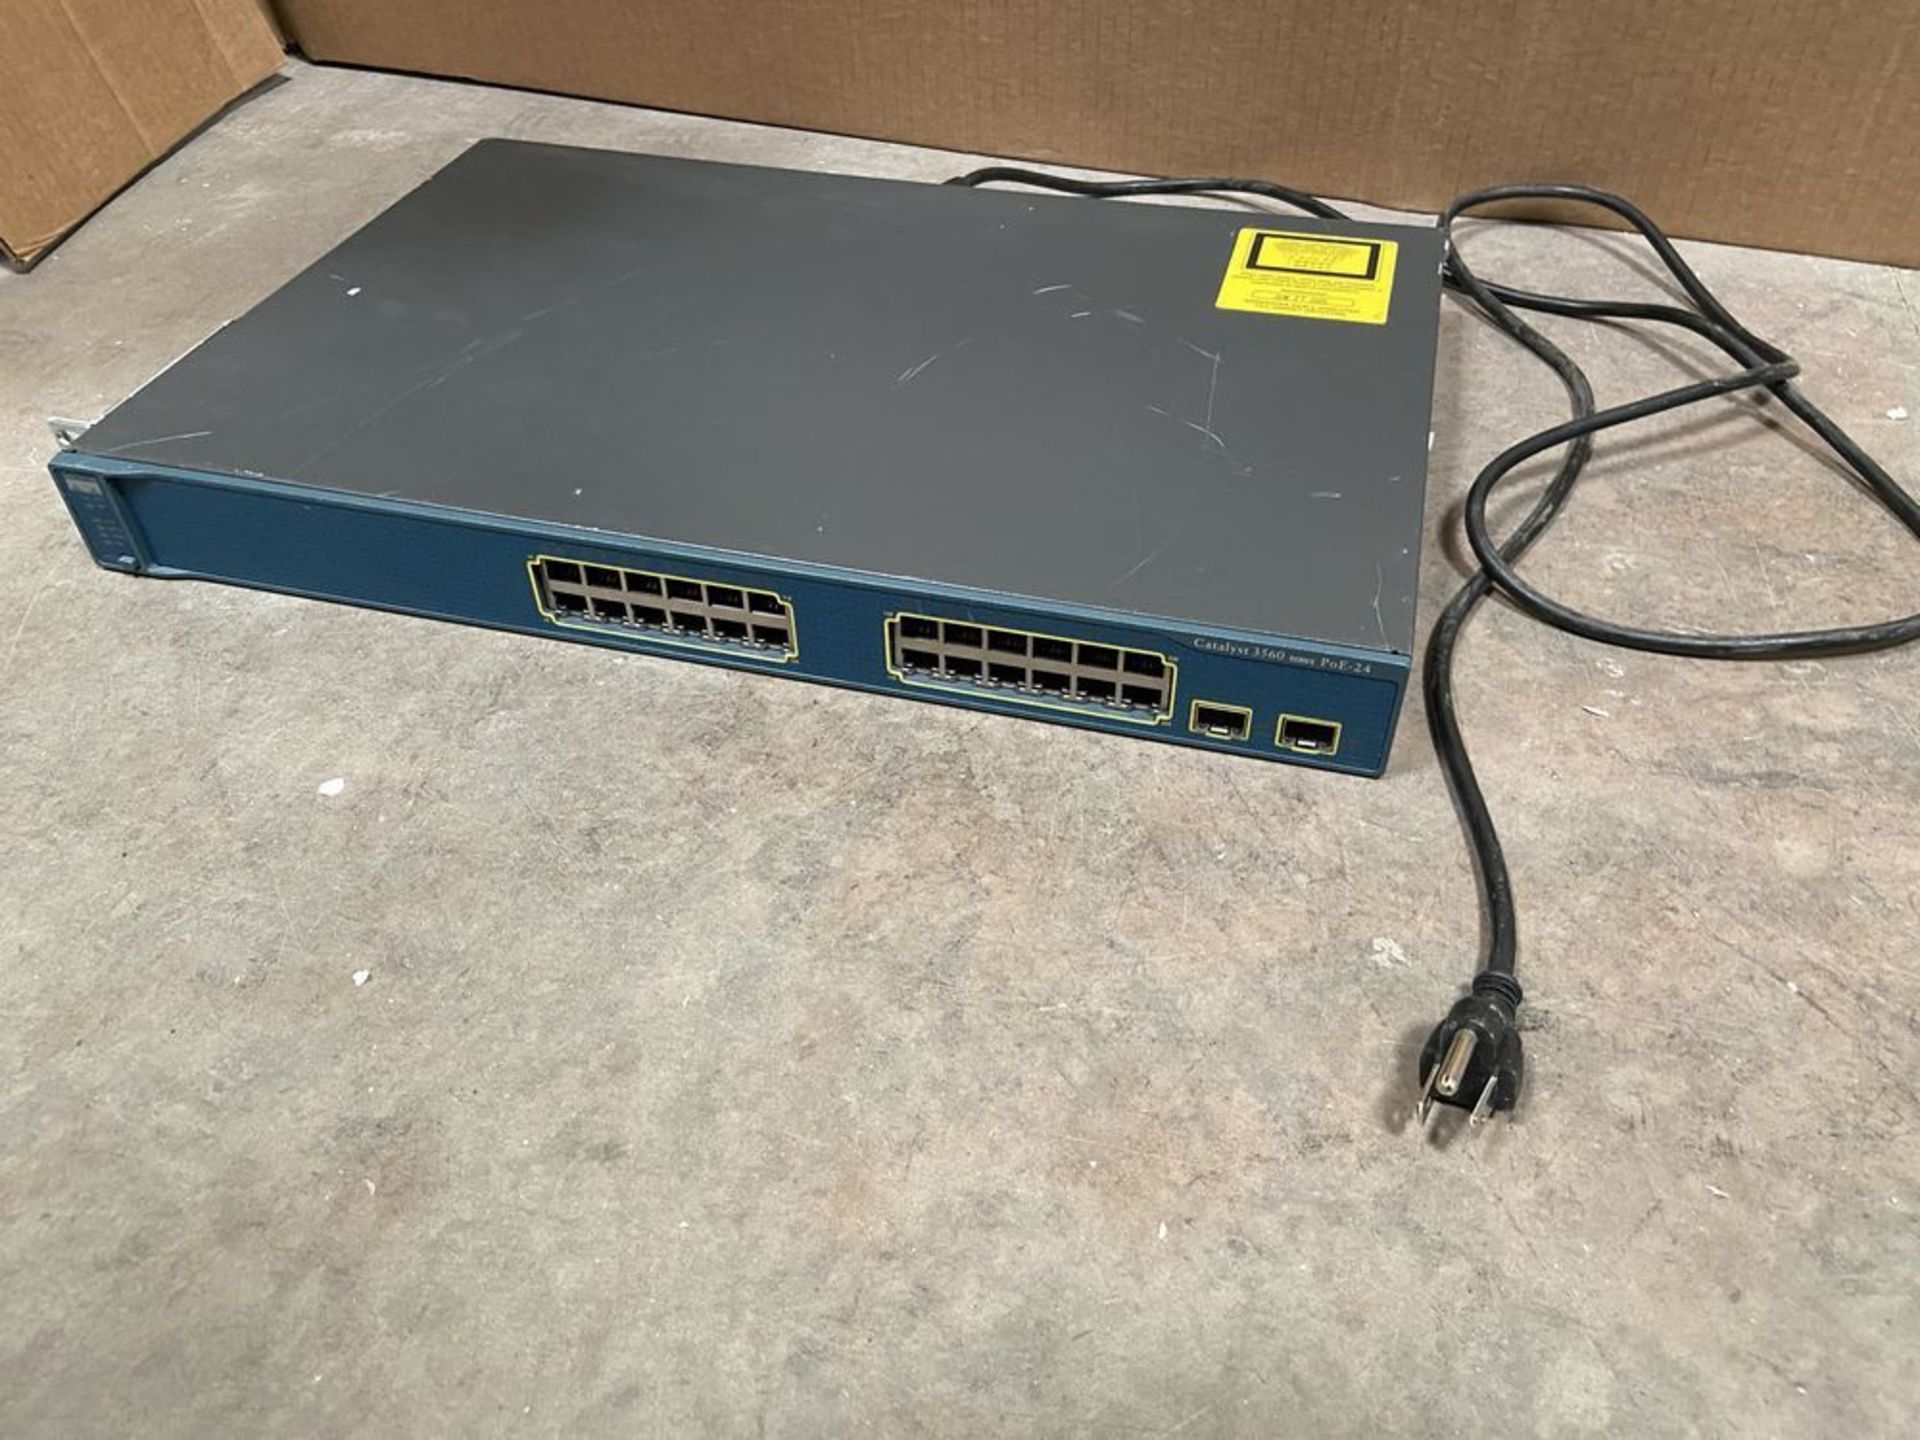 Catalyst 3560 Series PoE-24 Networking Equipment Switch/WS-C3560-24PS-S - Image 2 of 6